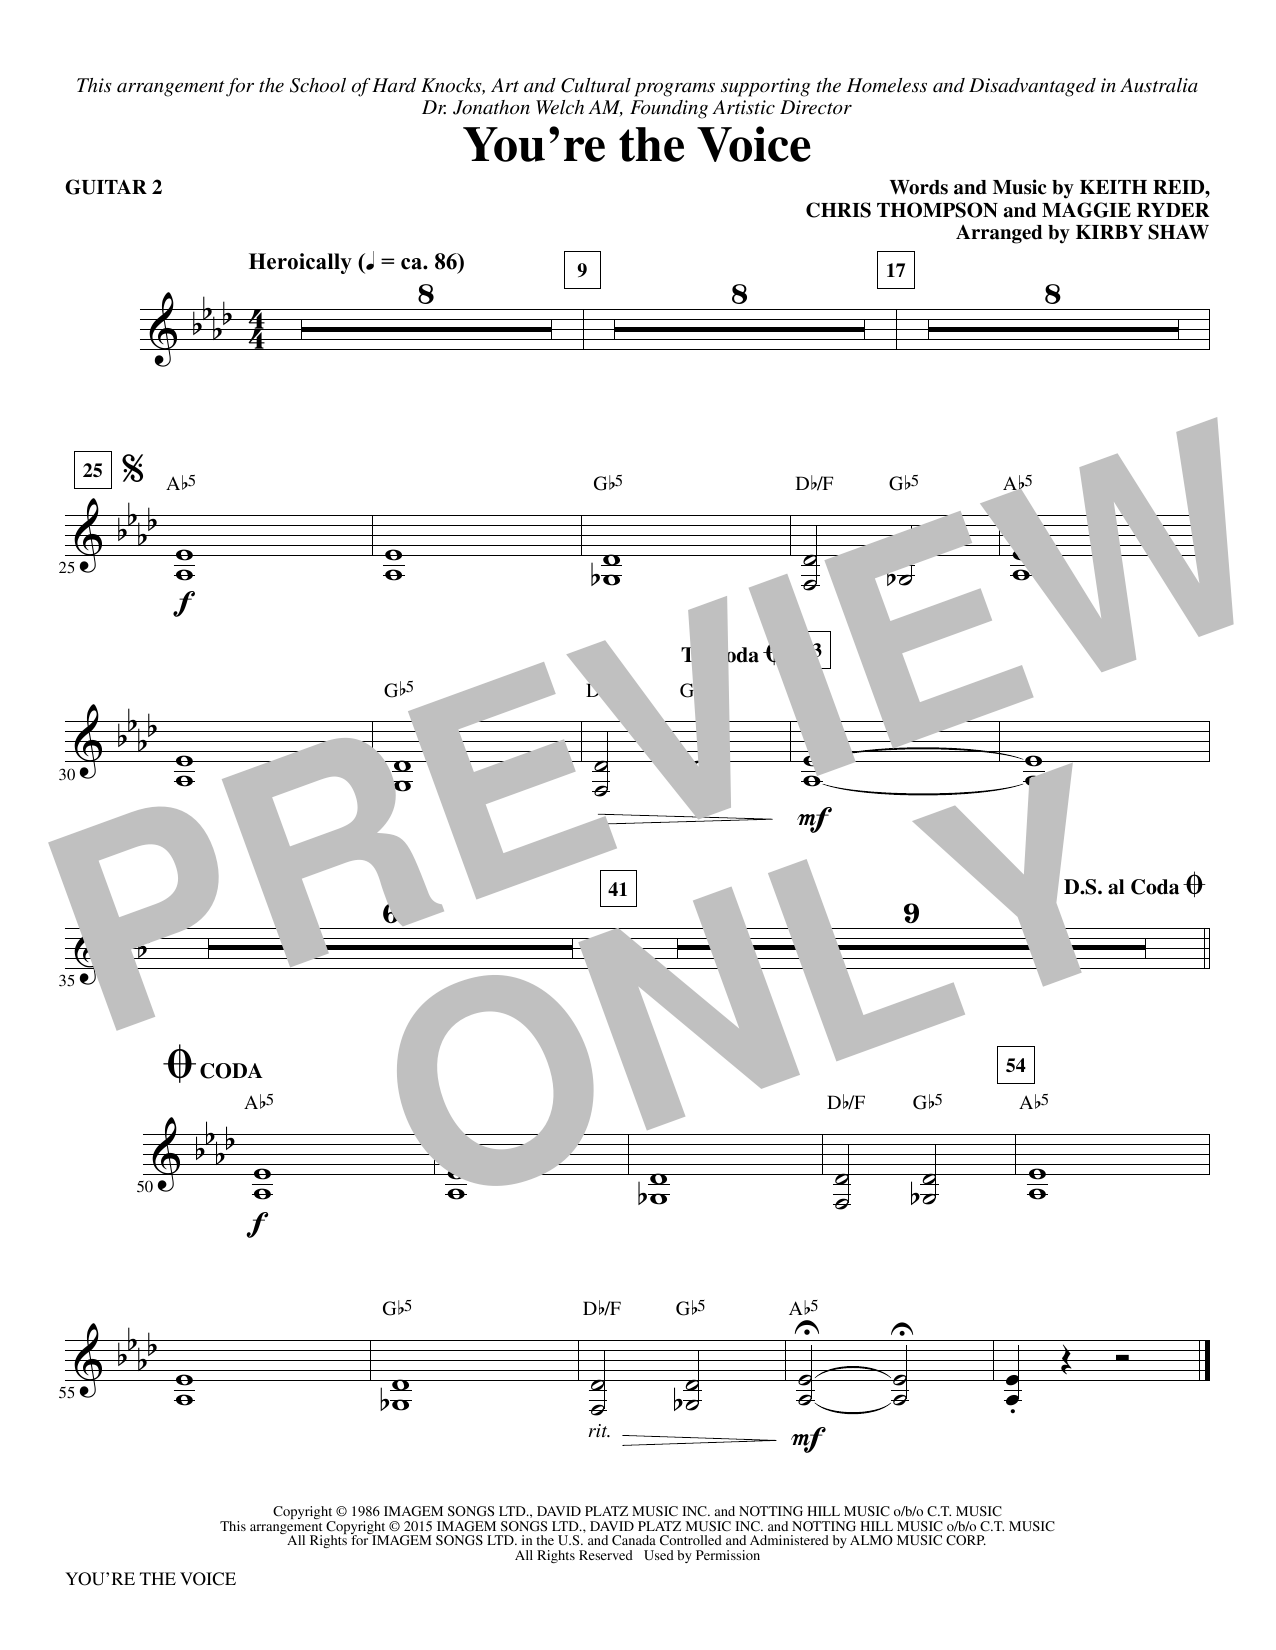 John Farnham You're the Voice (arr. Kirby Shaw) - Guitar 2 sheet music notes and chords. Download Printable PDF.